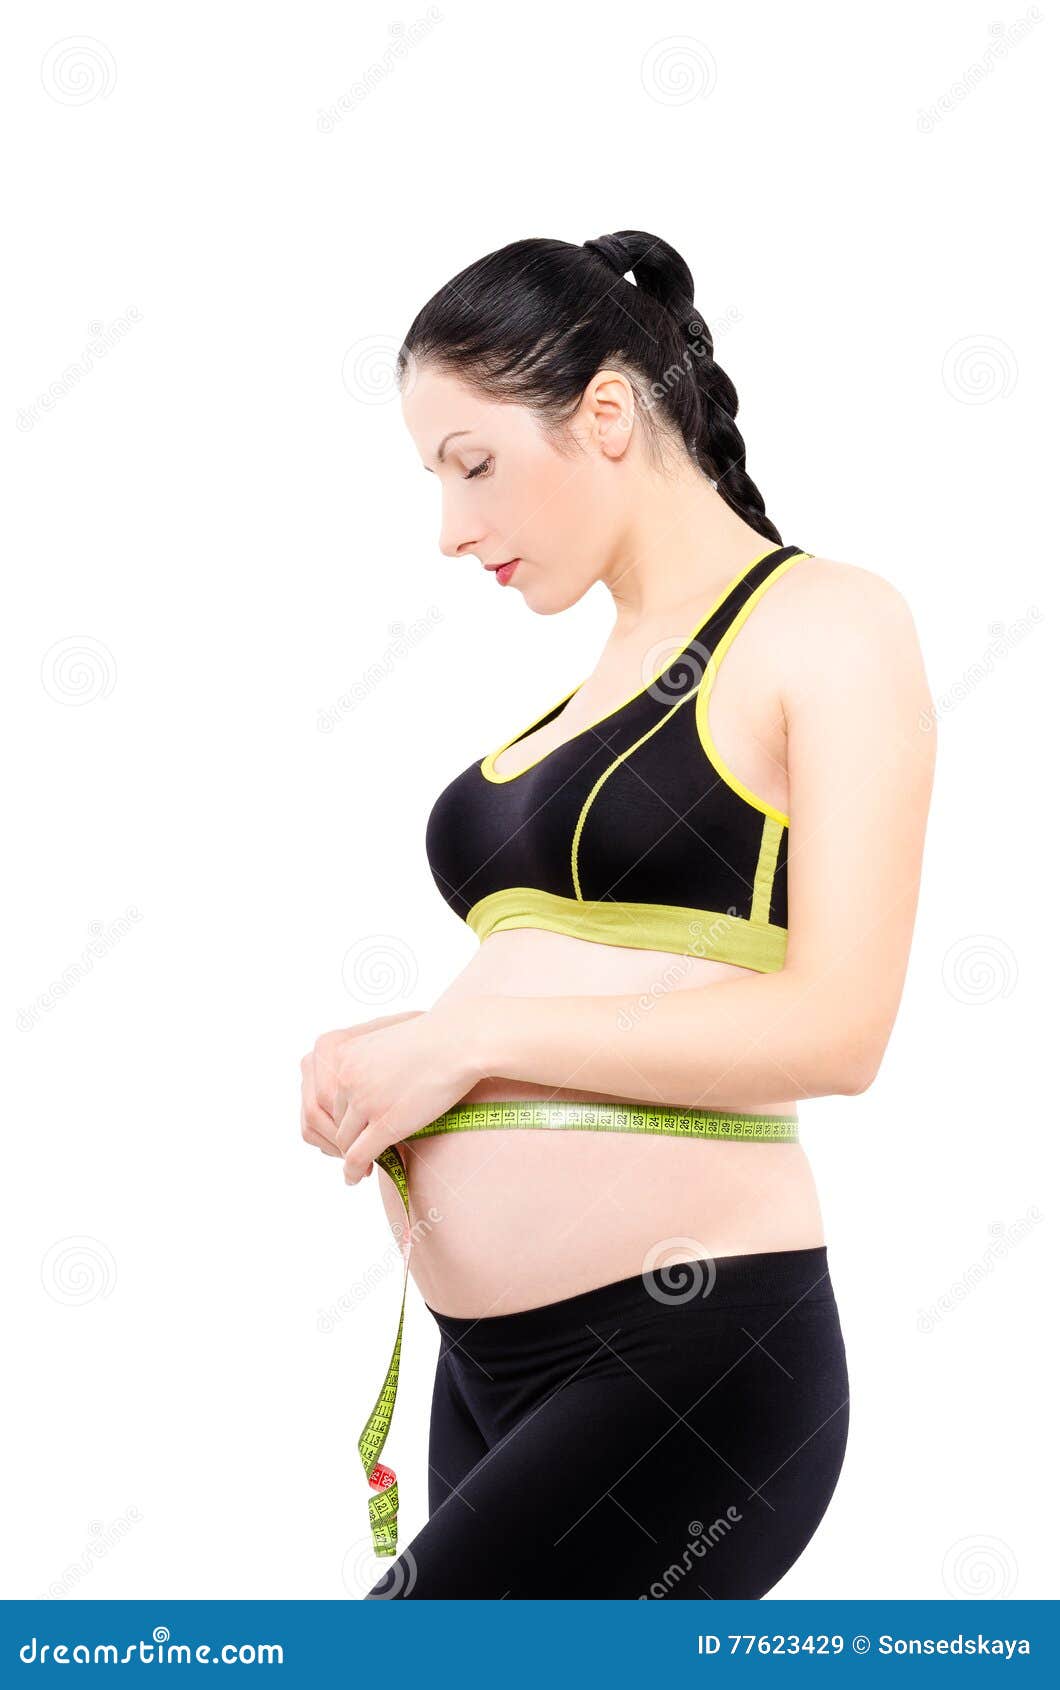 beautiful pregnant woman measures the abdominal circumference centimeter tape